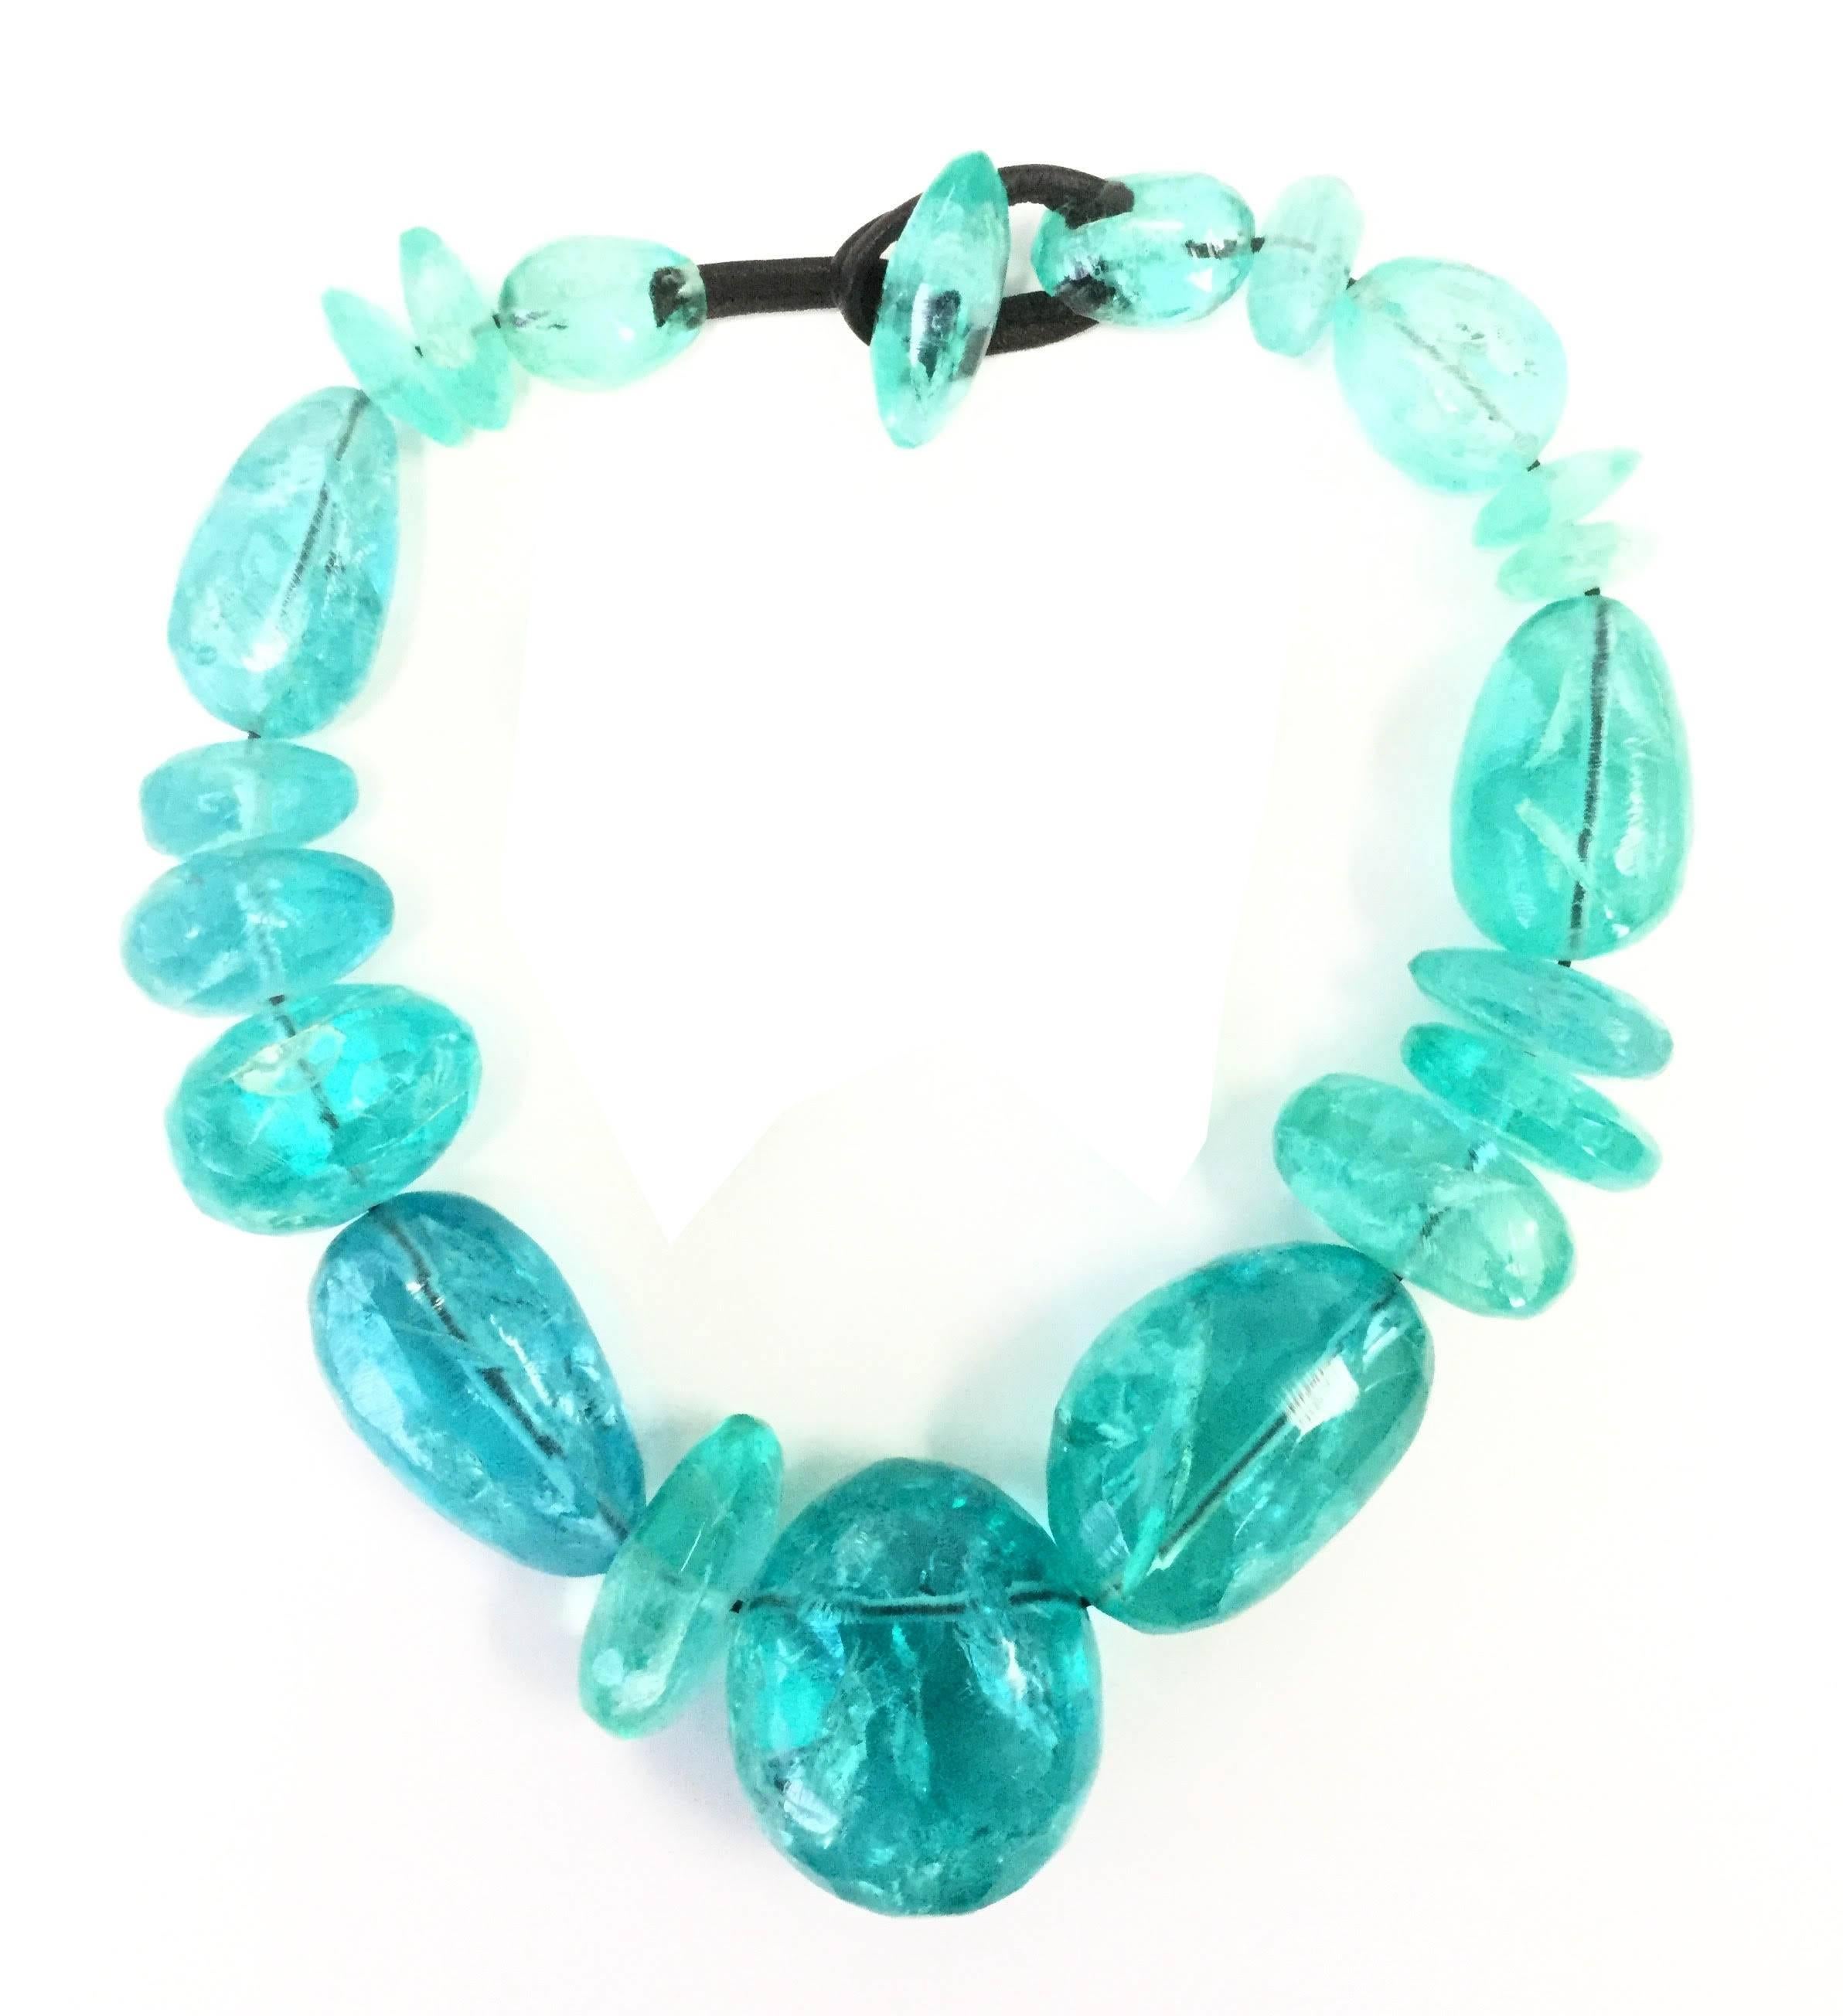 
This gorgeous demi parure created by Gerda Lynnggaard for Nikoli Monies is composed of a set of earrings and a necklace, both made of the same incredible ice blue beads held together on a leather cord. The beads feature expertly molded rifts and